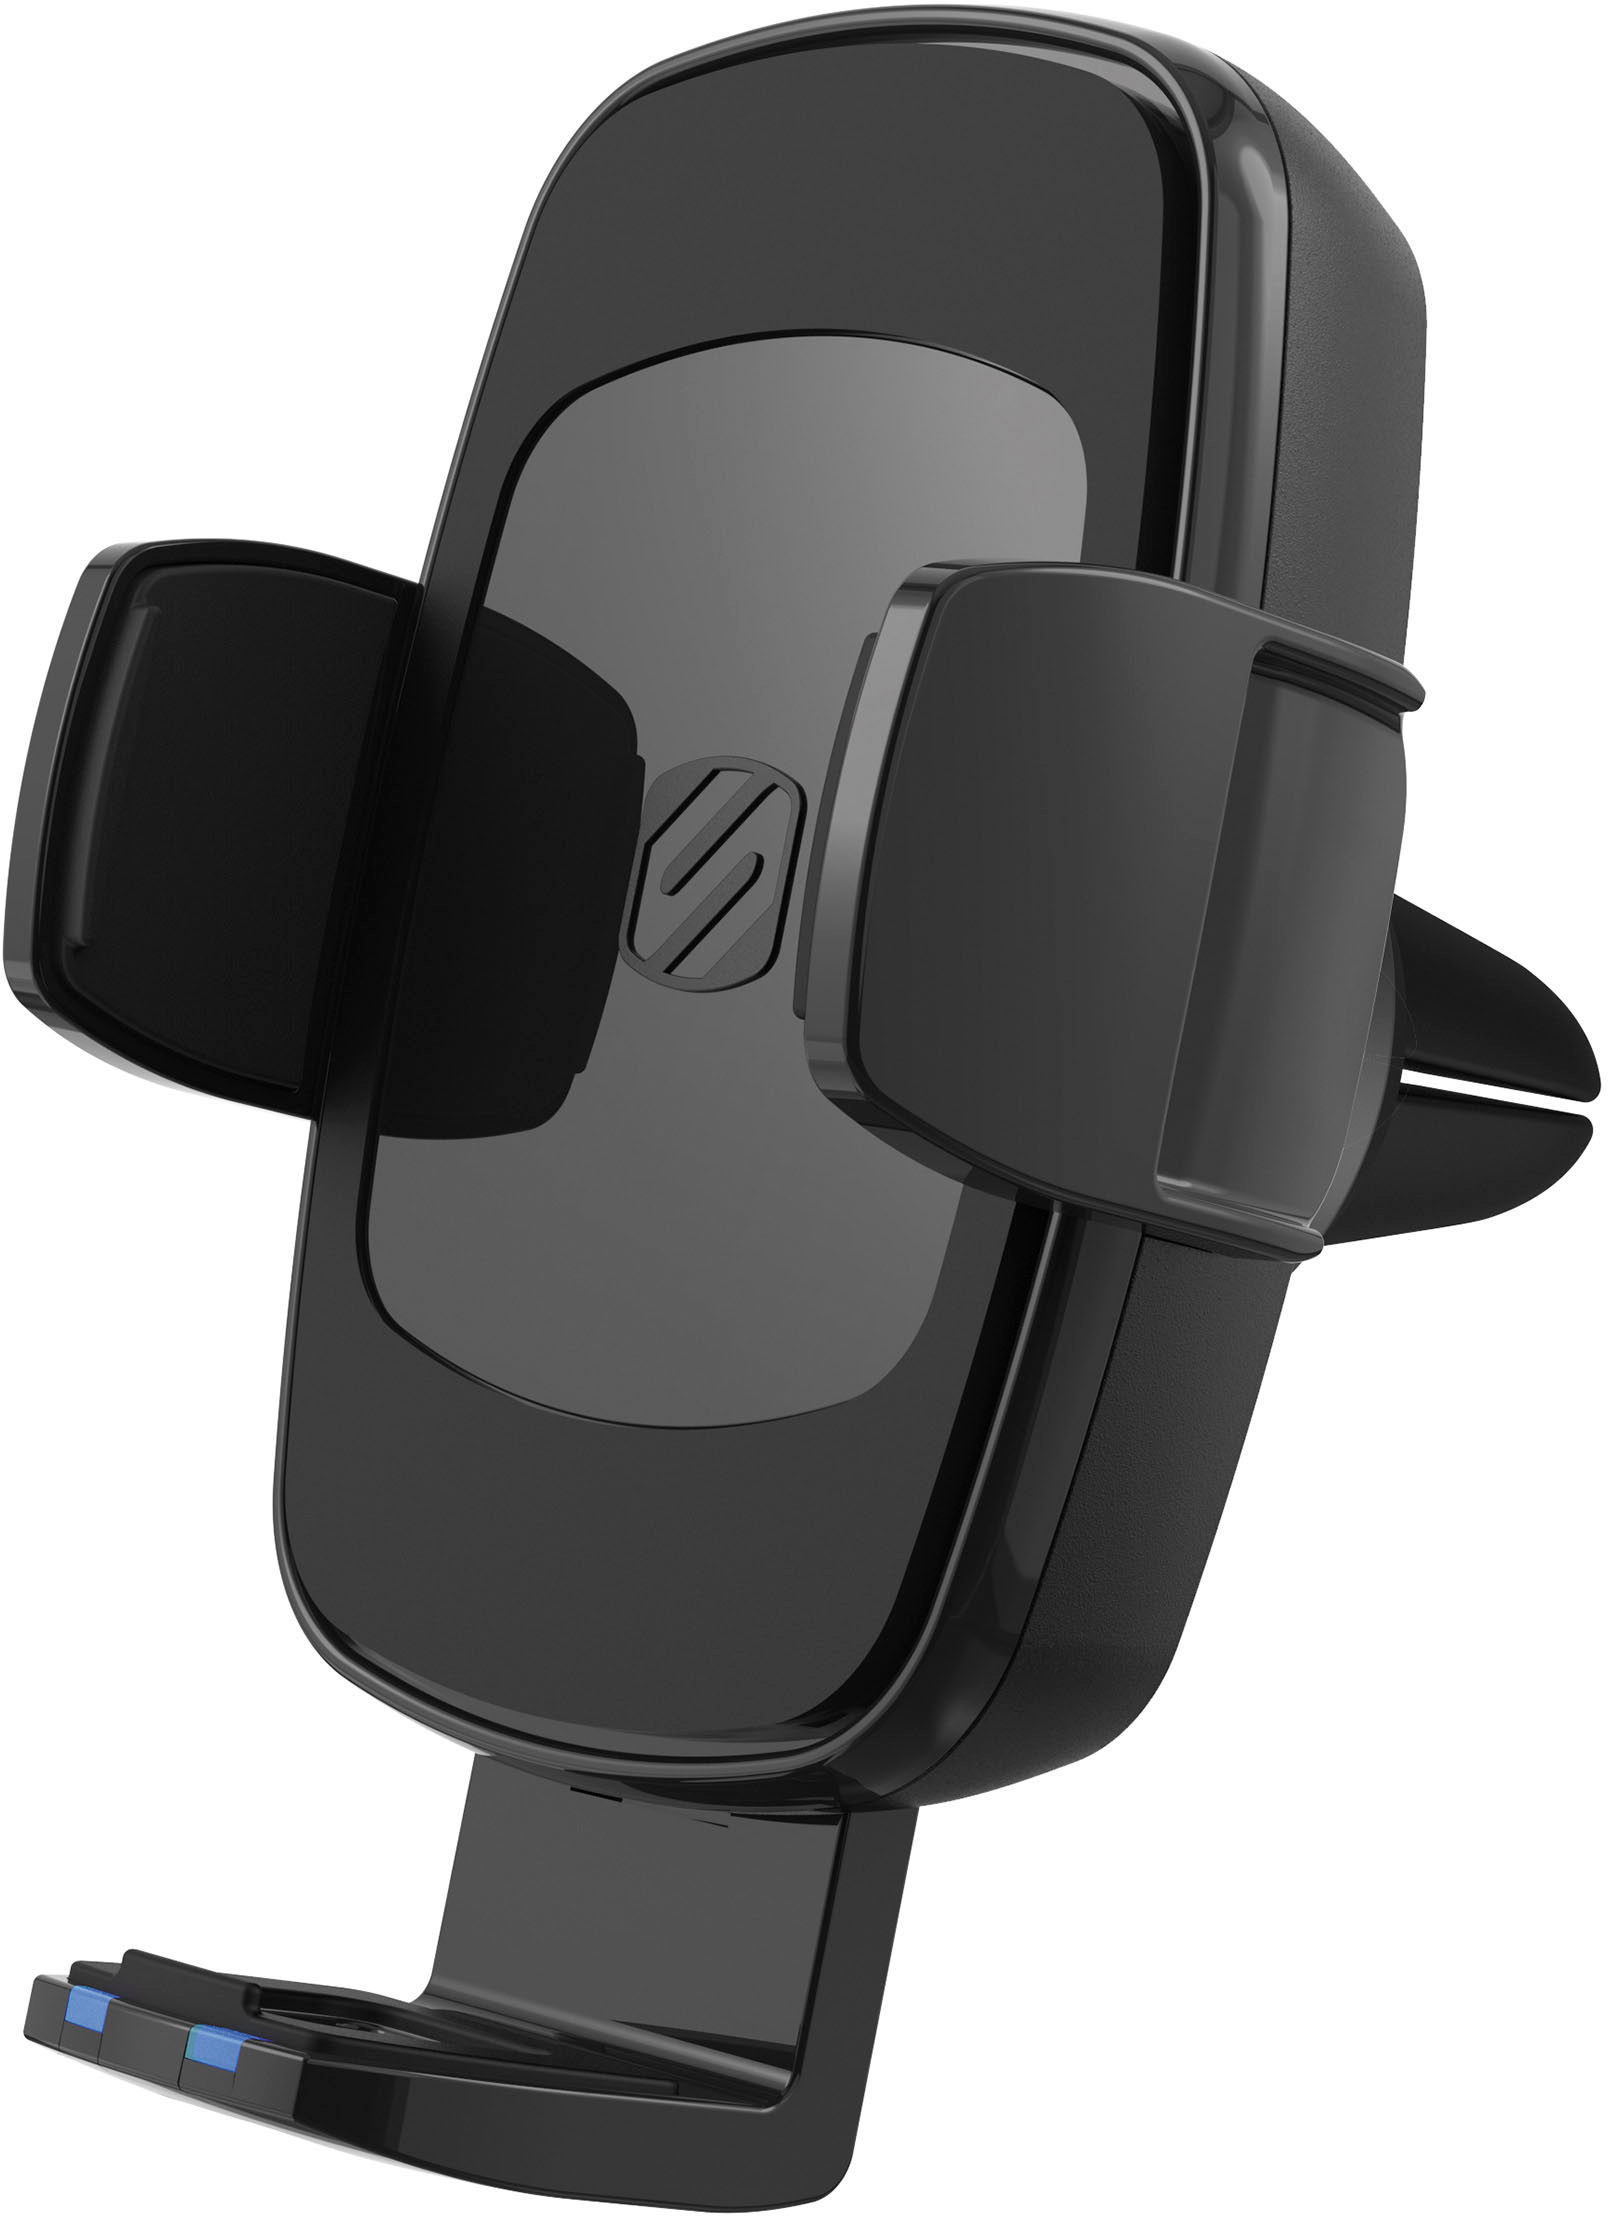 Angle View: Scosche - MagicMount Elite Magnetic Phone/GPS Vent Mount for Most Cell Phones - Space Gray